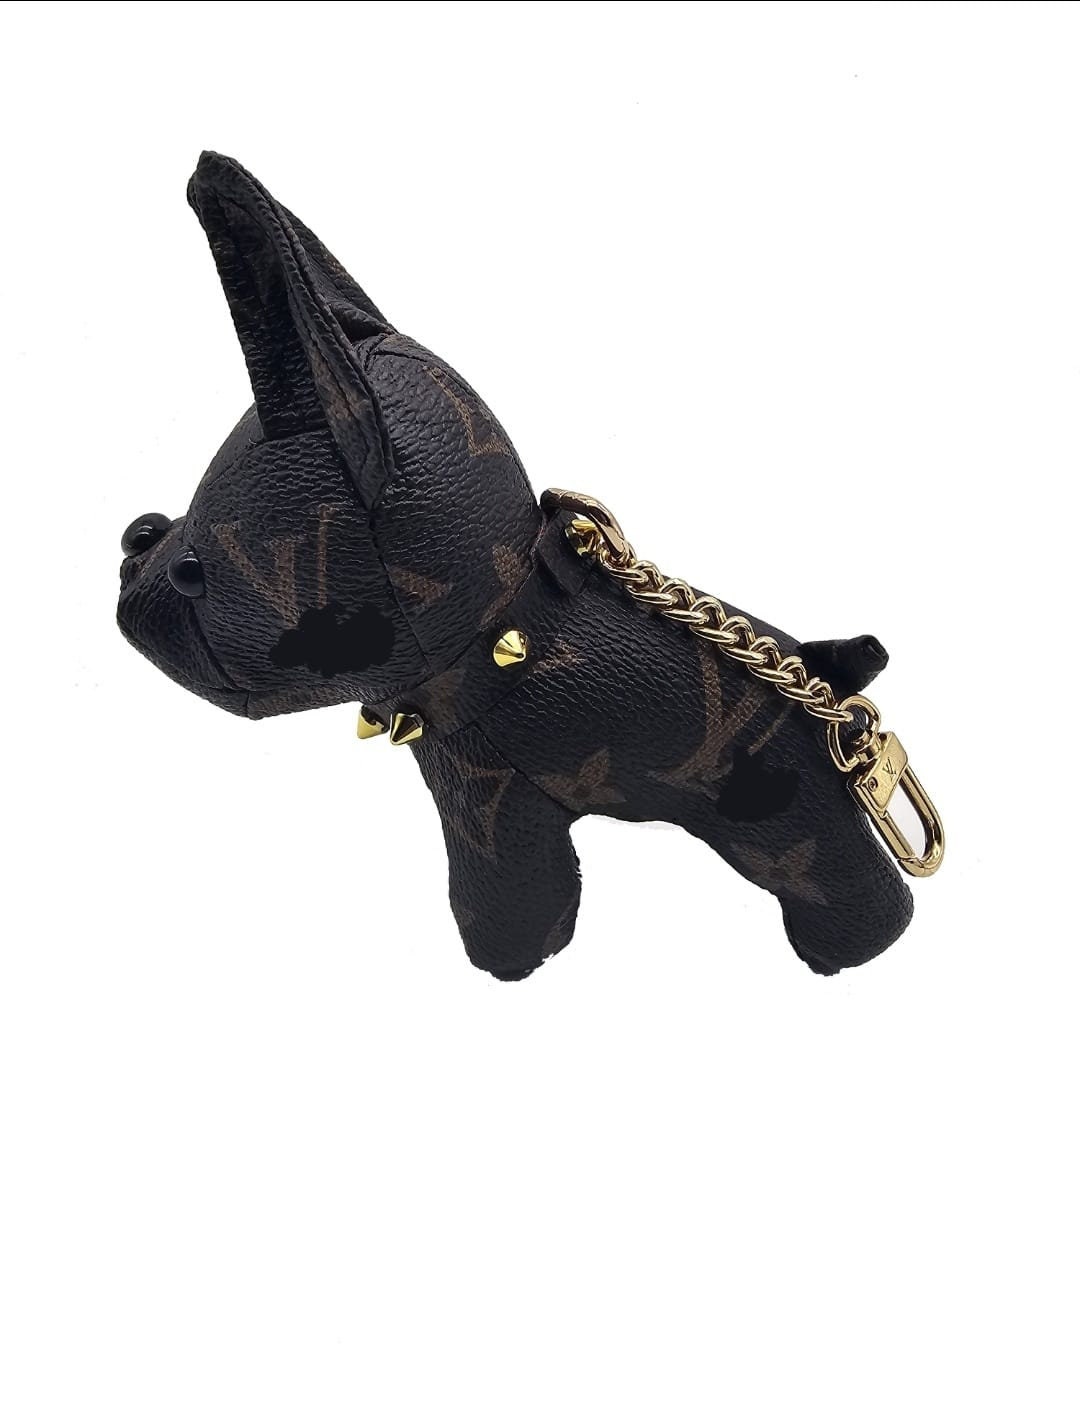 Louis Vuitton LV Cute Dog Bag Charm And Key Holder from koshope